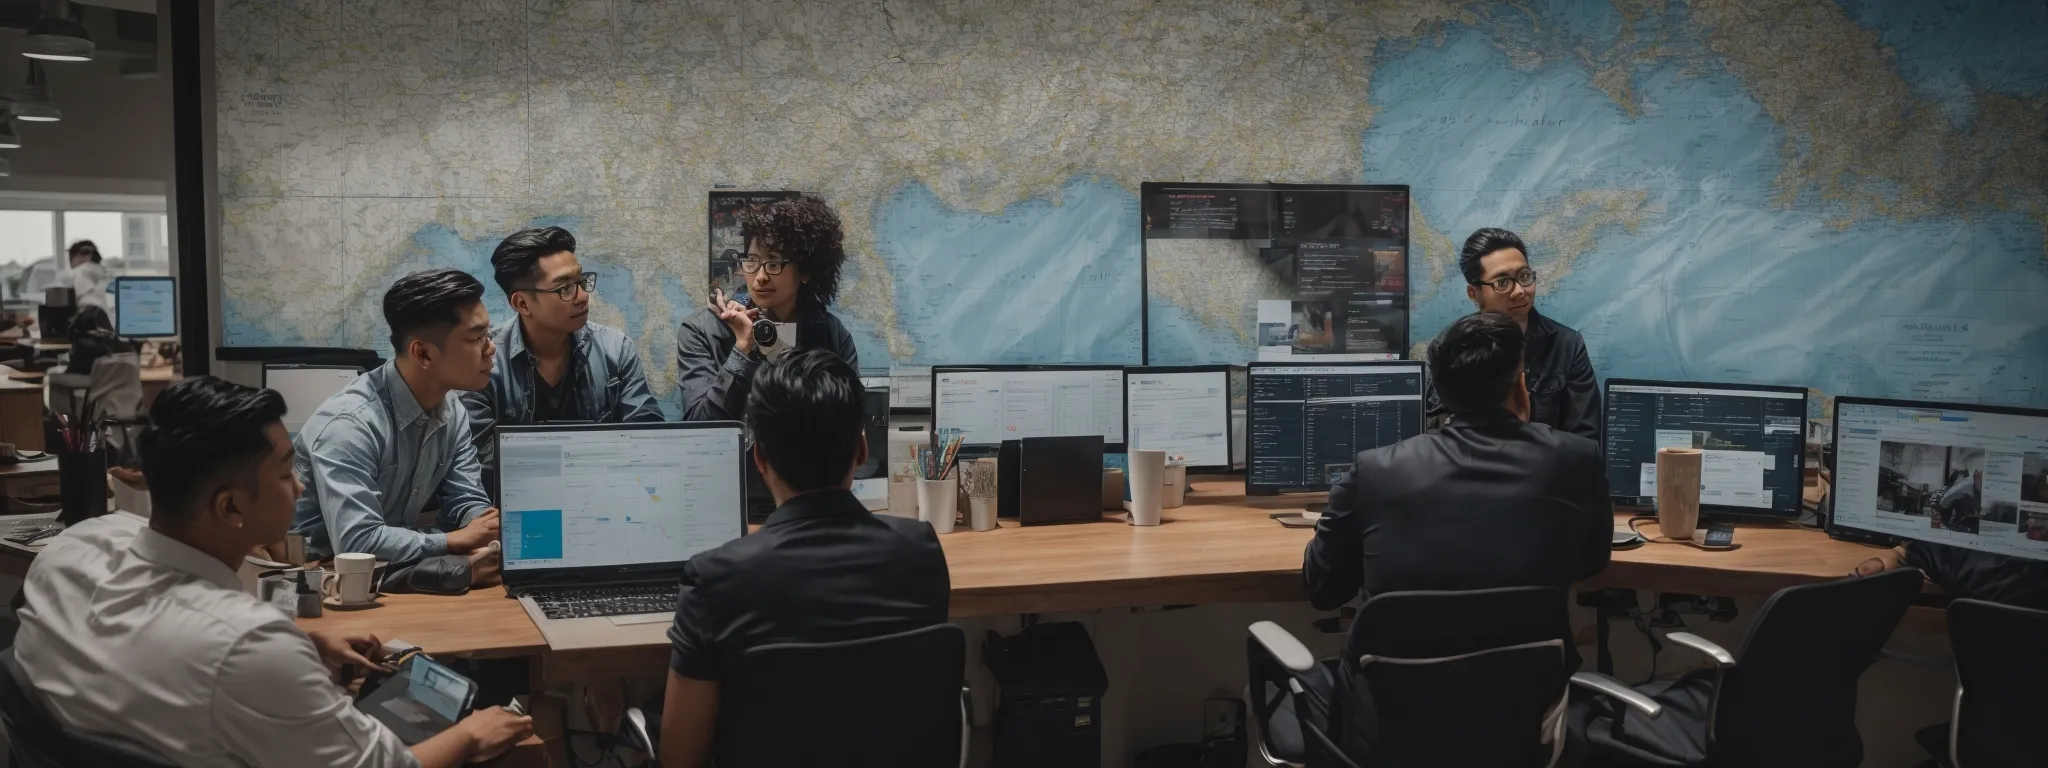 a digital marketing team sits collaboratively around a table with multiple screens displaying social media analytics and seo metrics while a delaware state map adorned wall signifies their focused market.